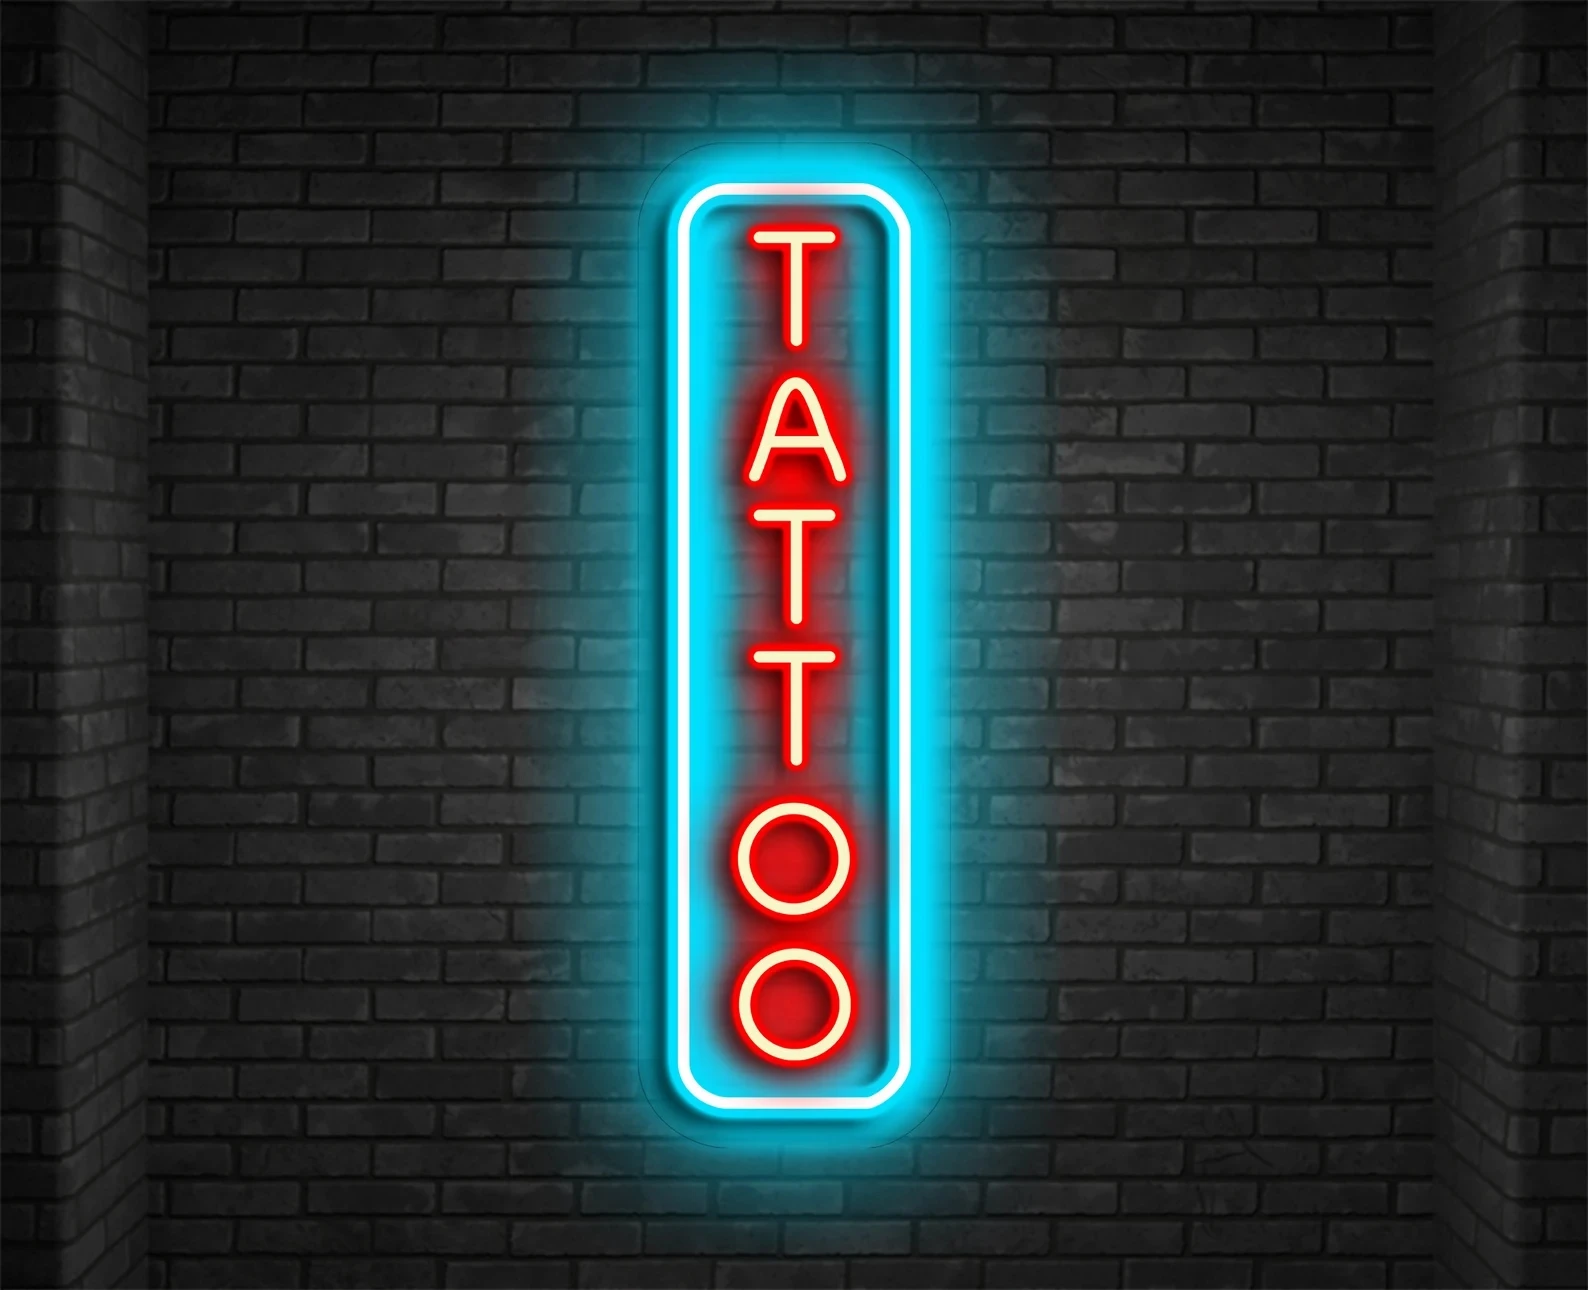 Tattoo and piercing parlor glowing neon signboard with rose emblem flower  symbol in circle frame with text vector  CanStock